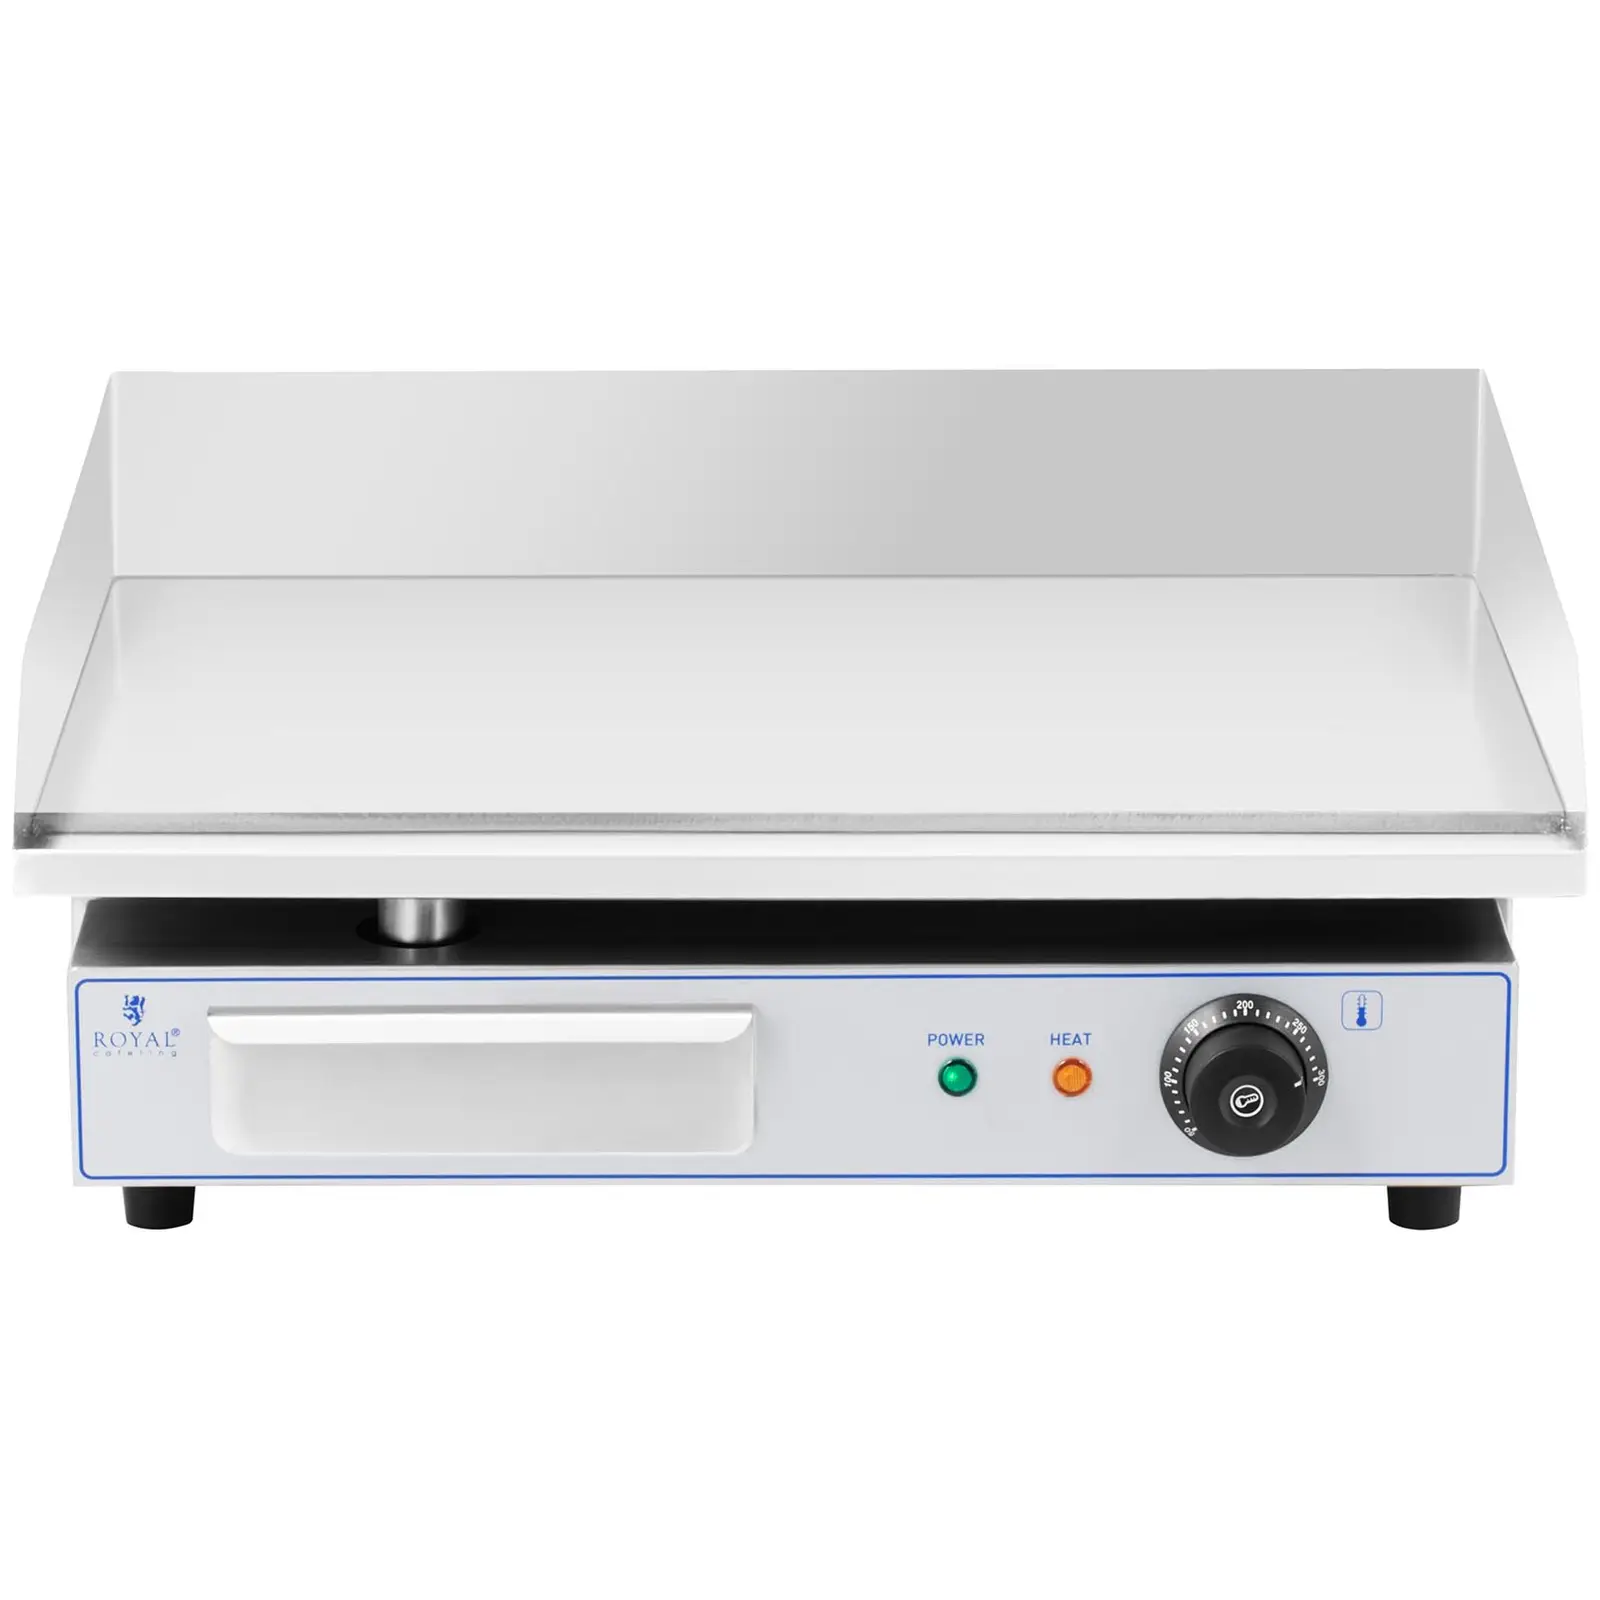 Fry top elettrico - Piastra liscia in acciaio inox - 550 x 400 mm - Royal Catering - Flat - 3,000 W